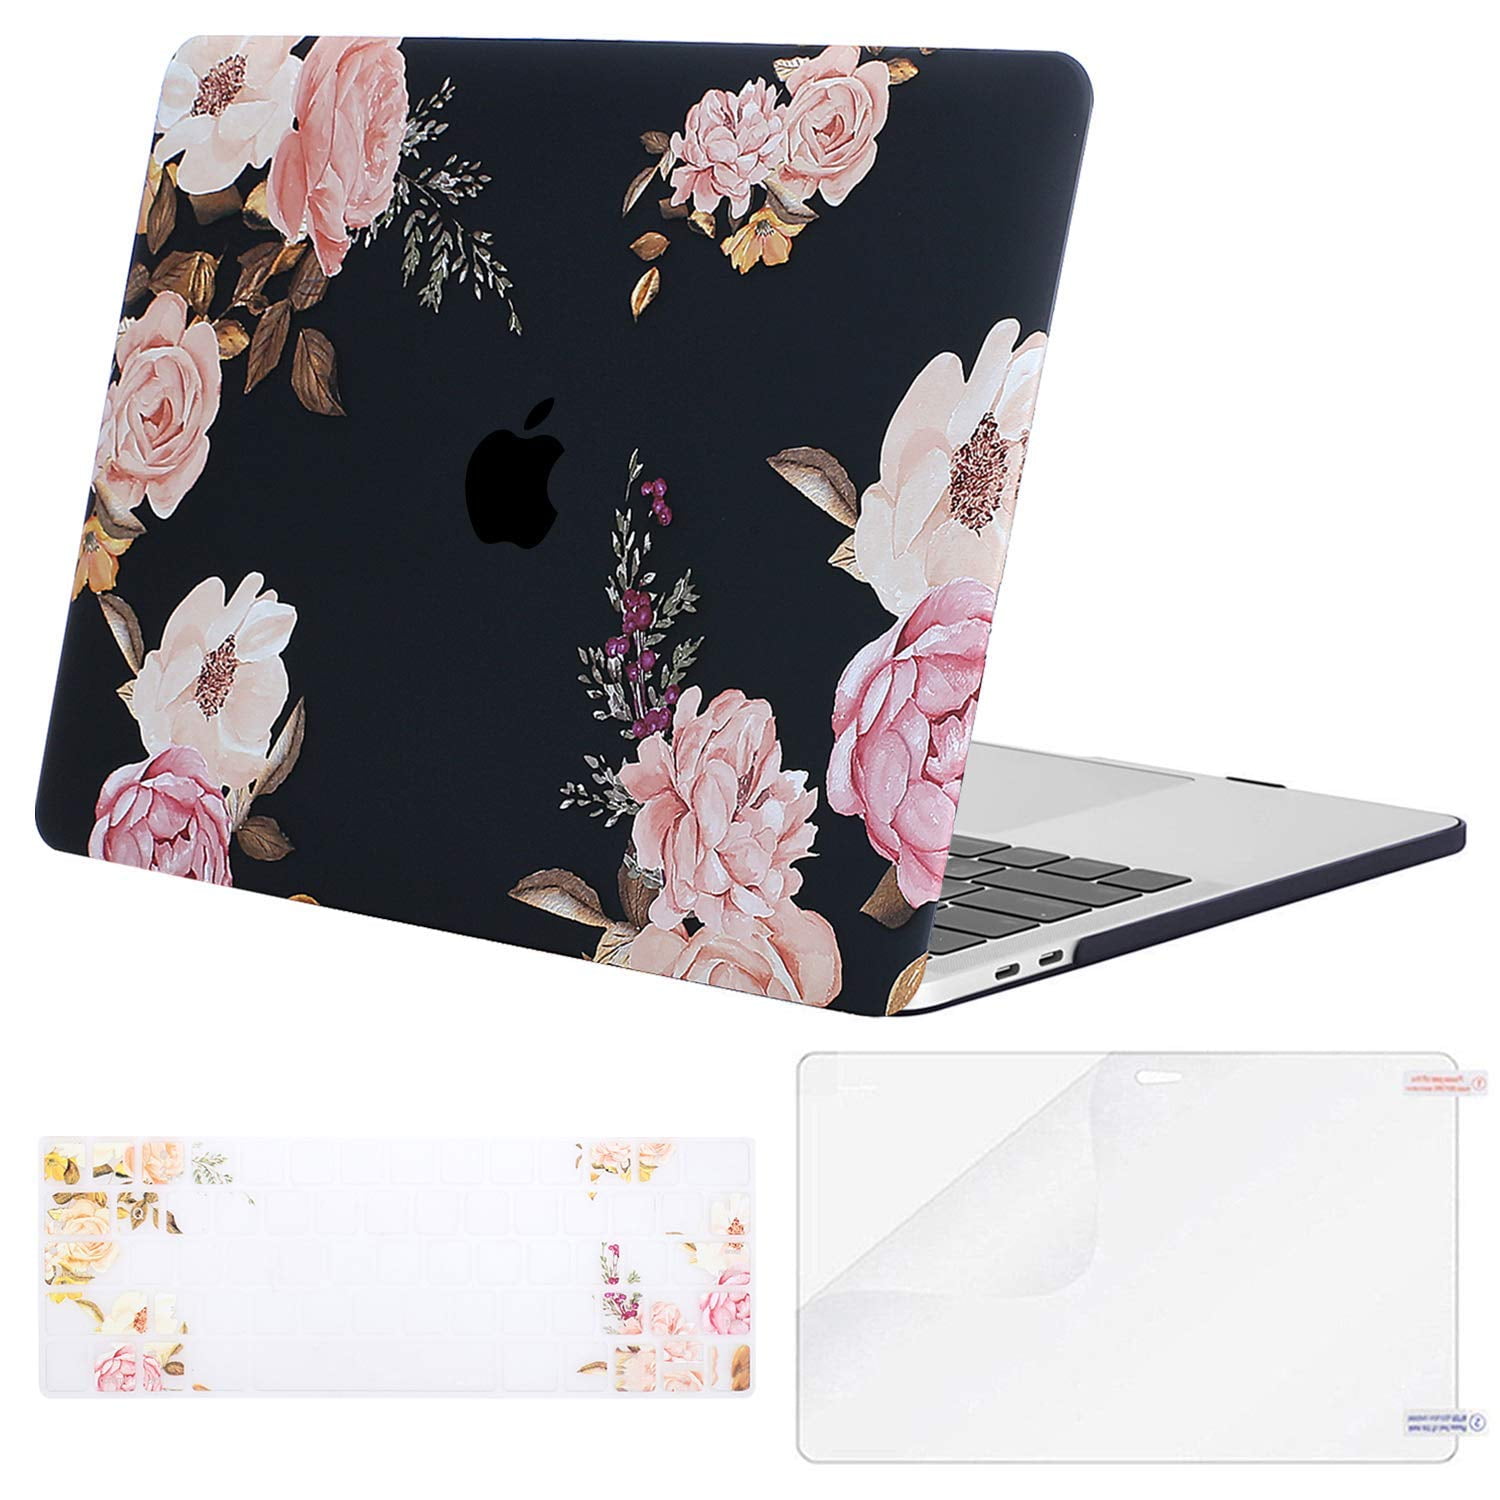 Laptop Hard Case Shell Keyboard Cover for Macbook Pro 13" 15" 2016 2017 2018 Mac 